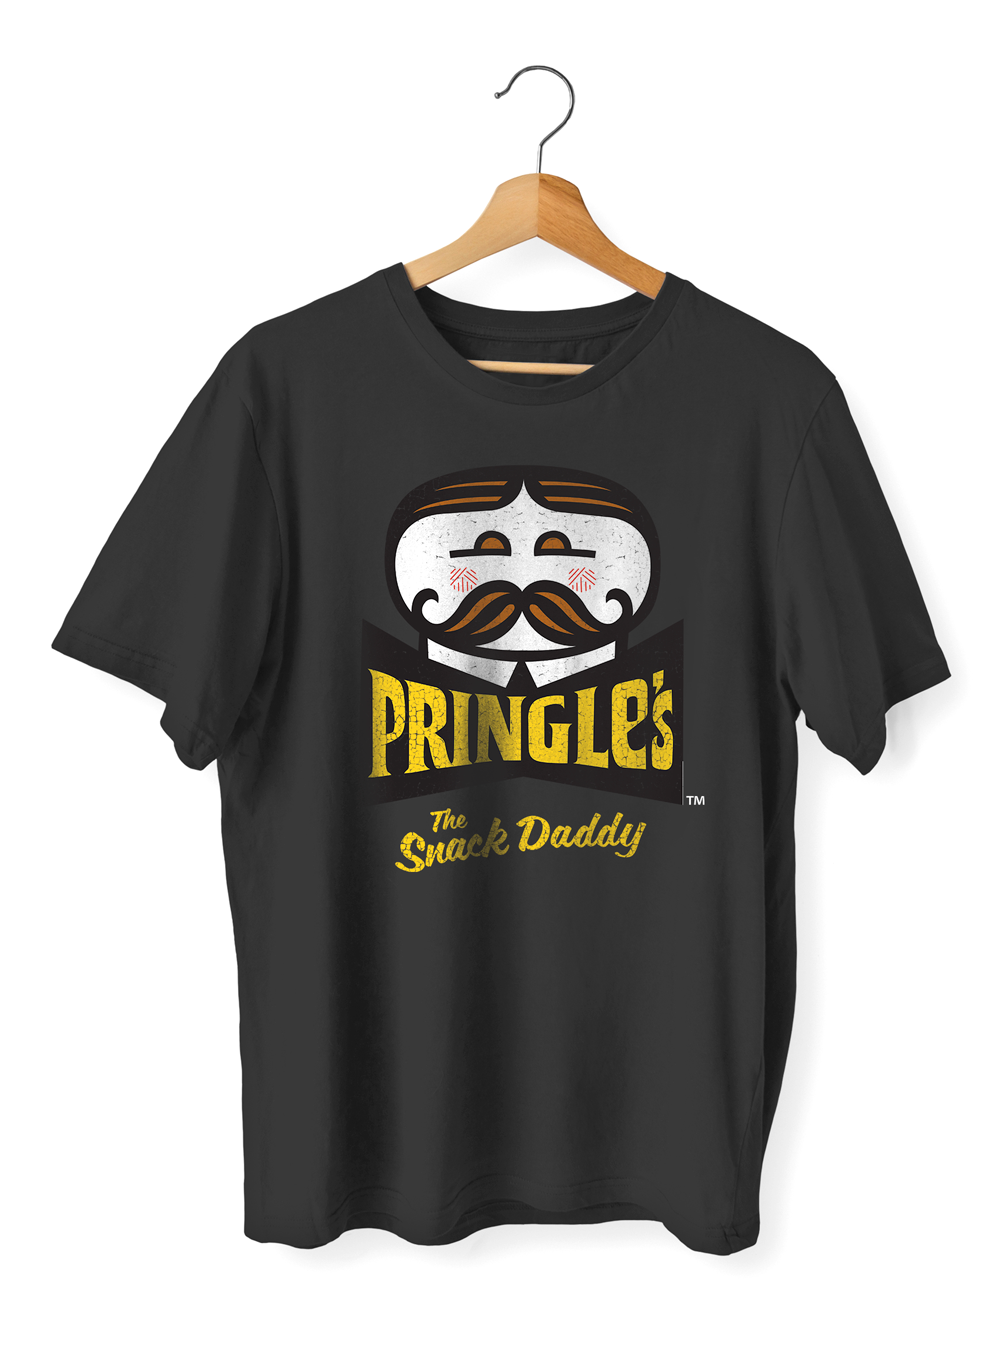 SWAG PRINGLES T-SHIRT - THE SNACK DADDY